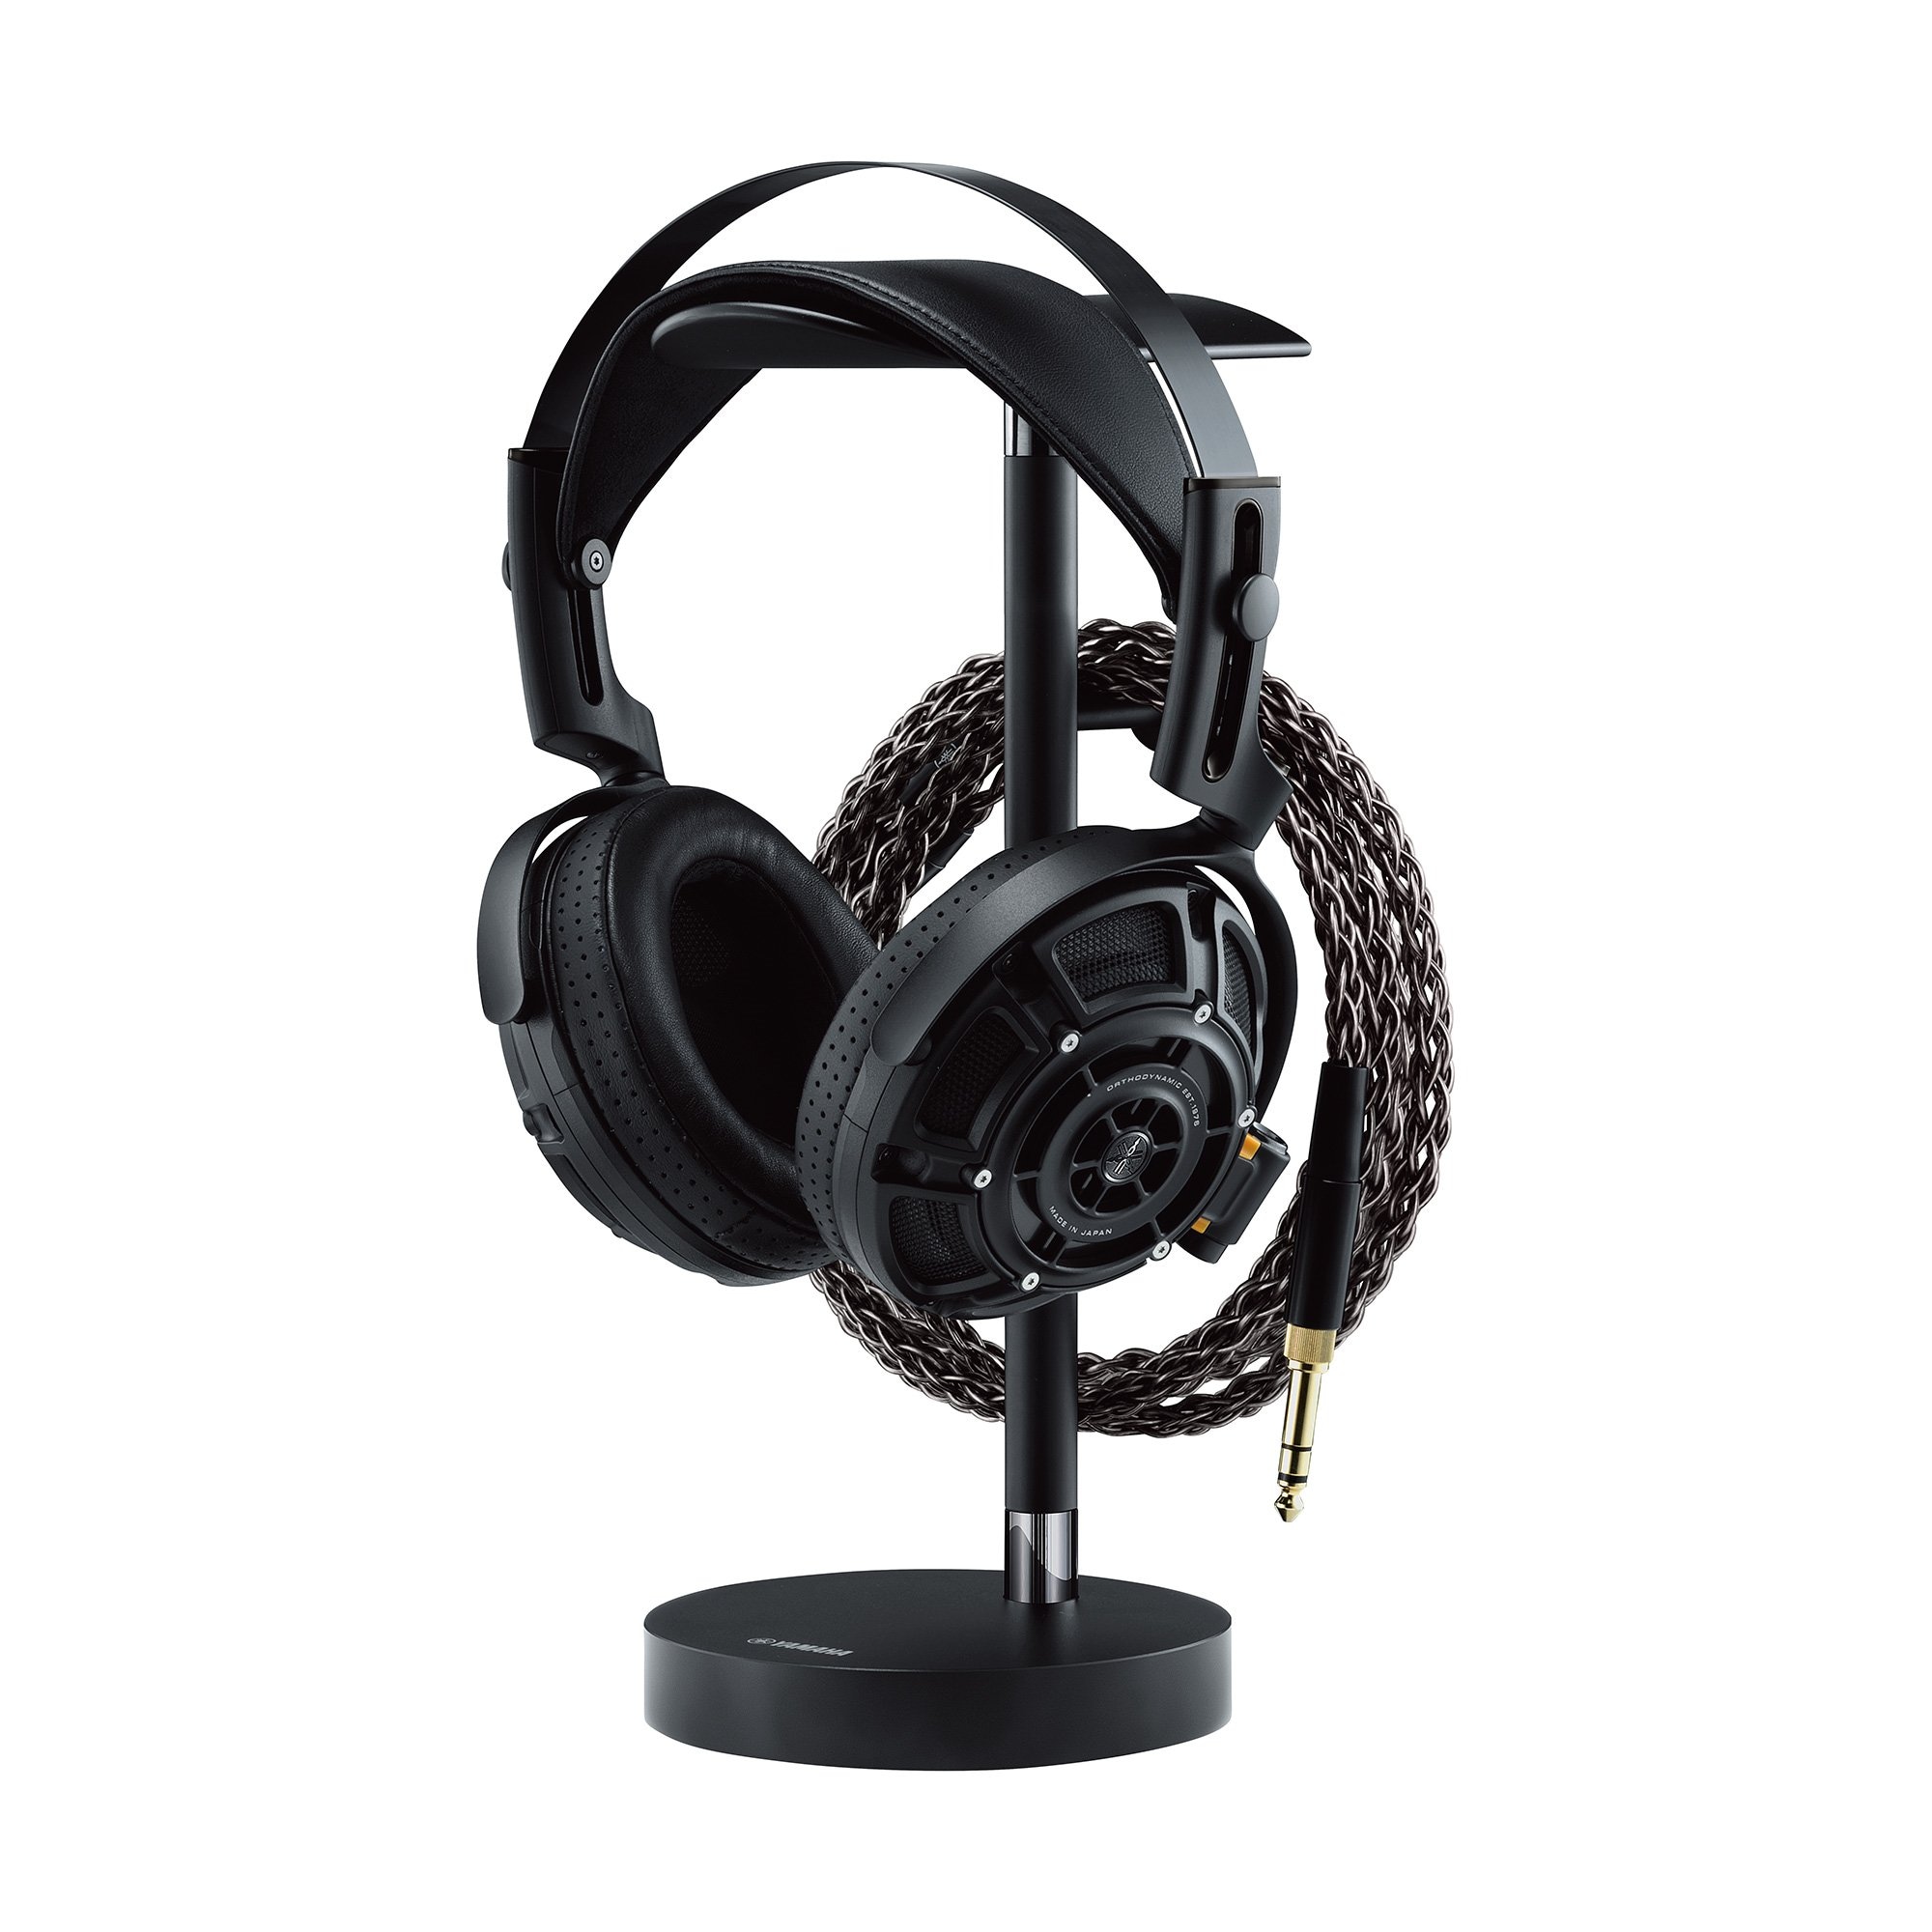 YH-5000SE - Overview - Headphones - Audio & Visual - Products 